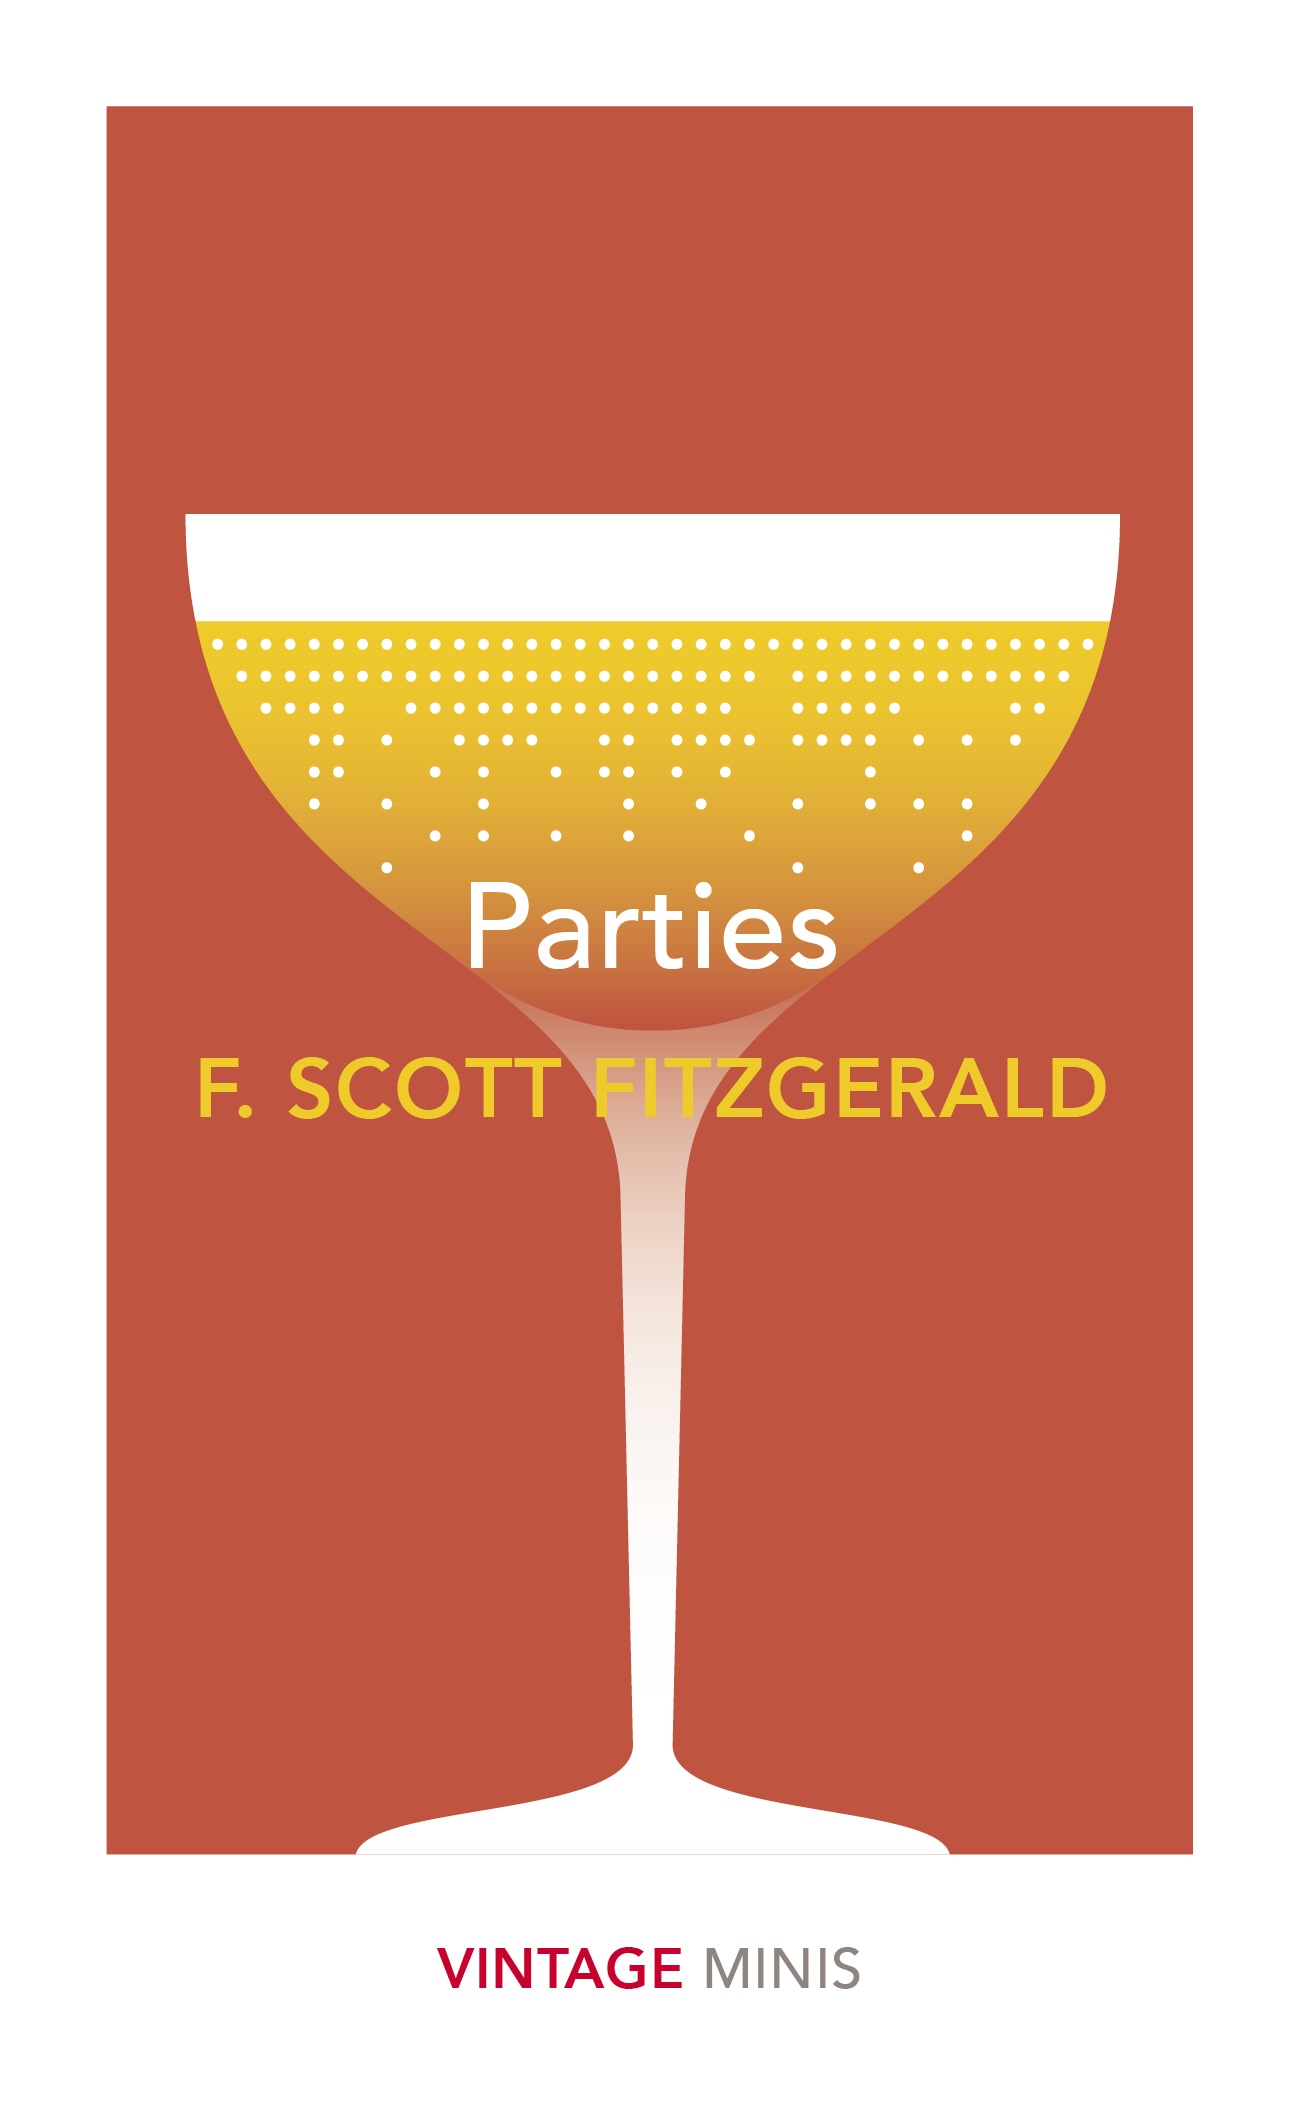 Book “Parties” by F. Scott Fitzgerald — March 5, 2020